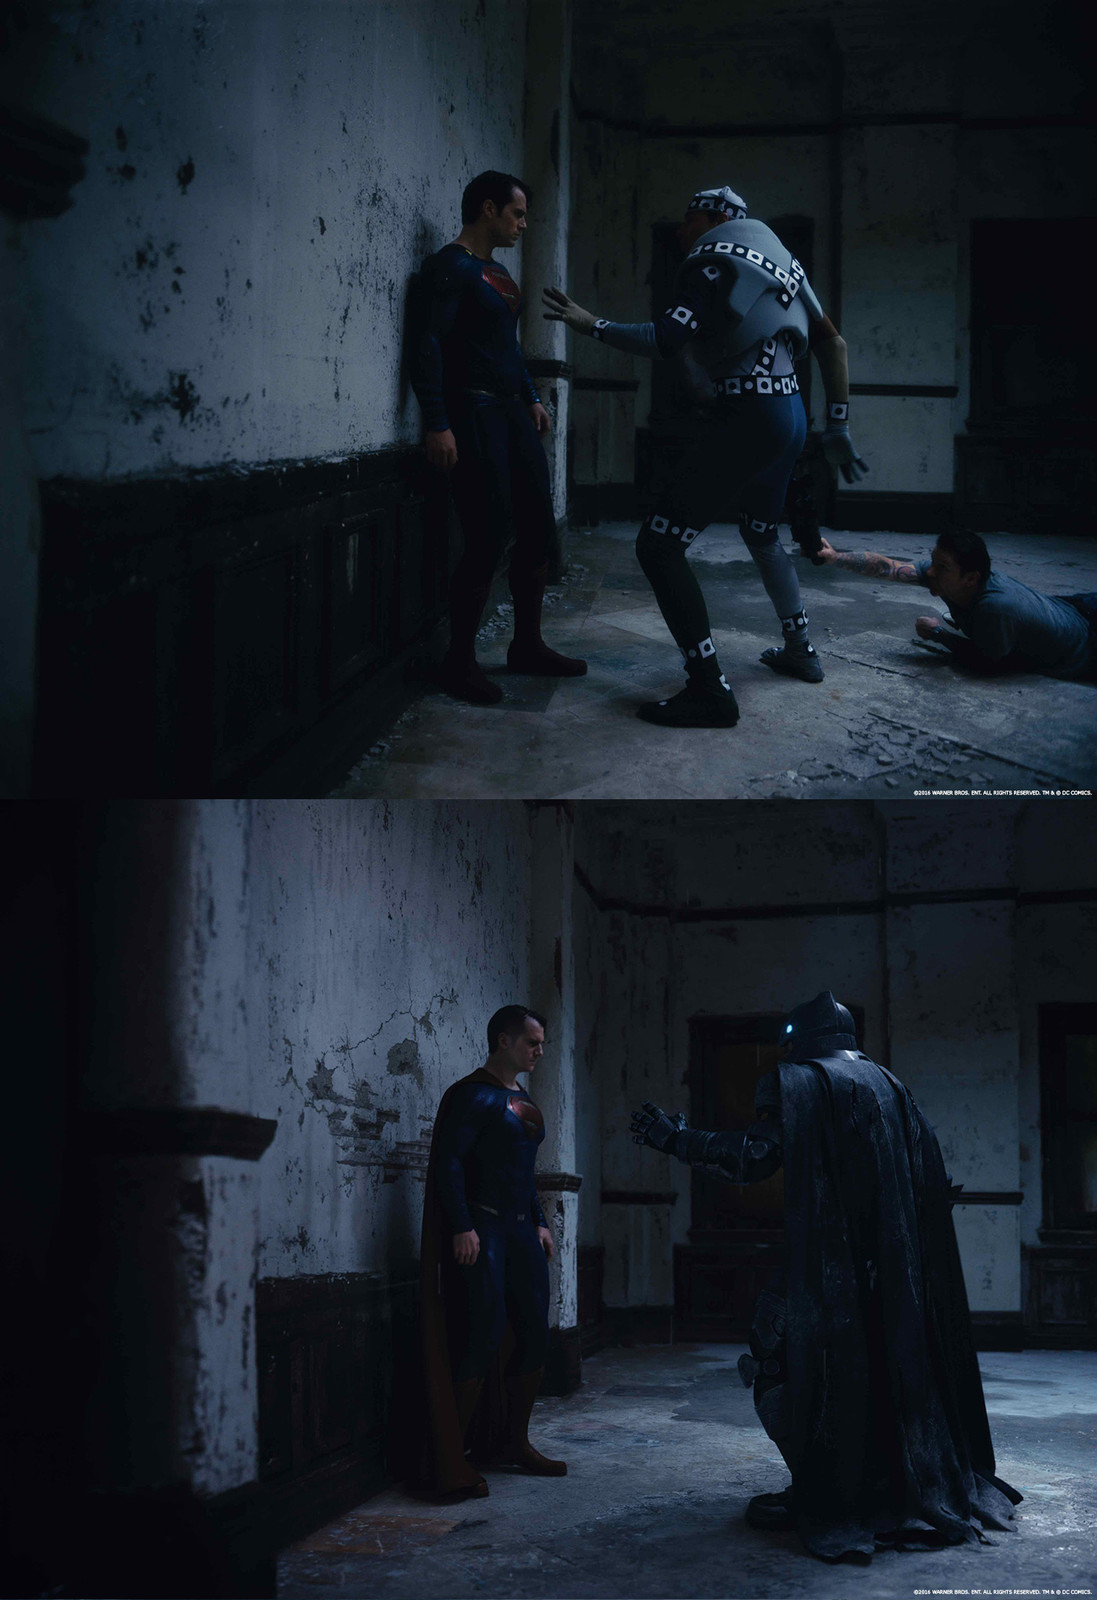 Here's a before/after of the work we did at MPC.  Both characters are full CG.  I was responsible for Look Development/Shading on Batman.  Shot Lighting by Lorenzo Serran.